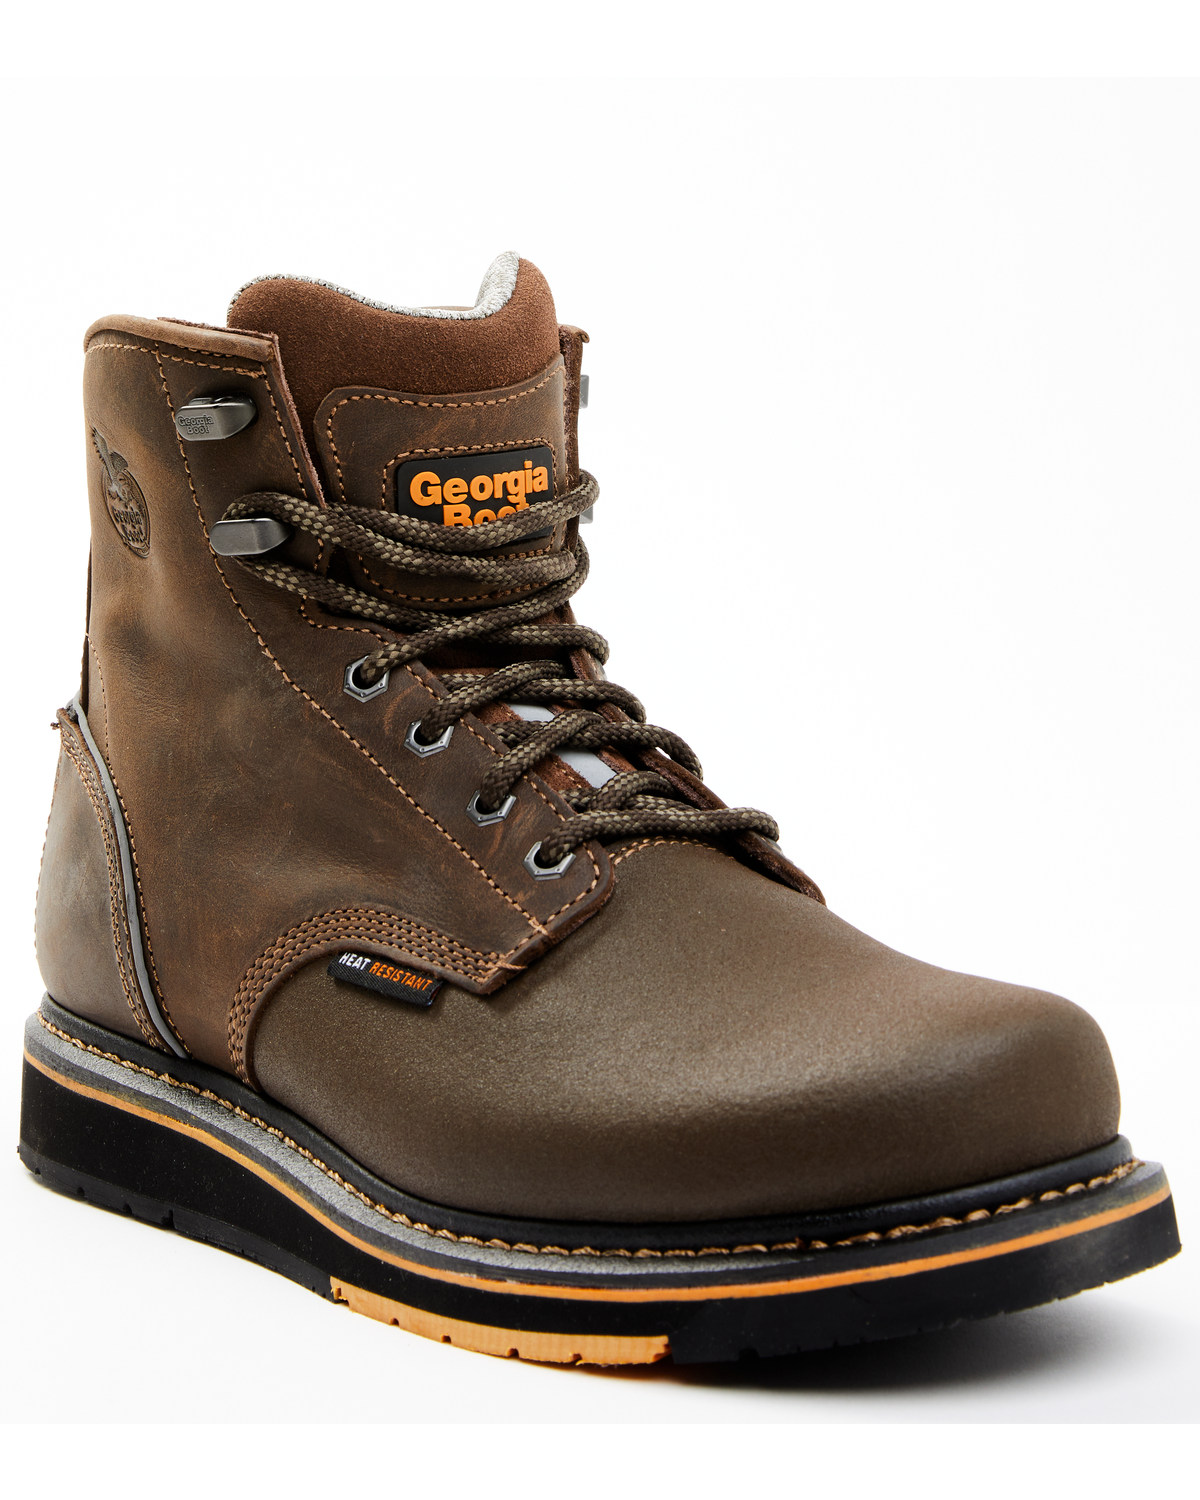 Georgia Boot Men's AMP Light Wedge WP 6" Lace-Up Work Boots - Round Toe